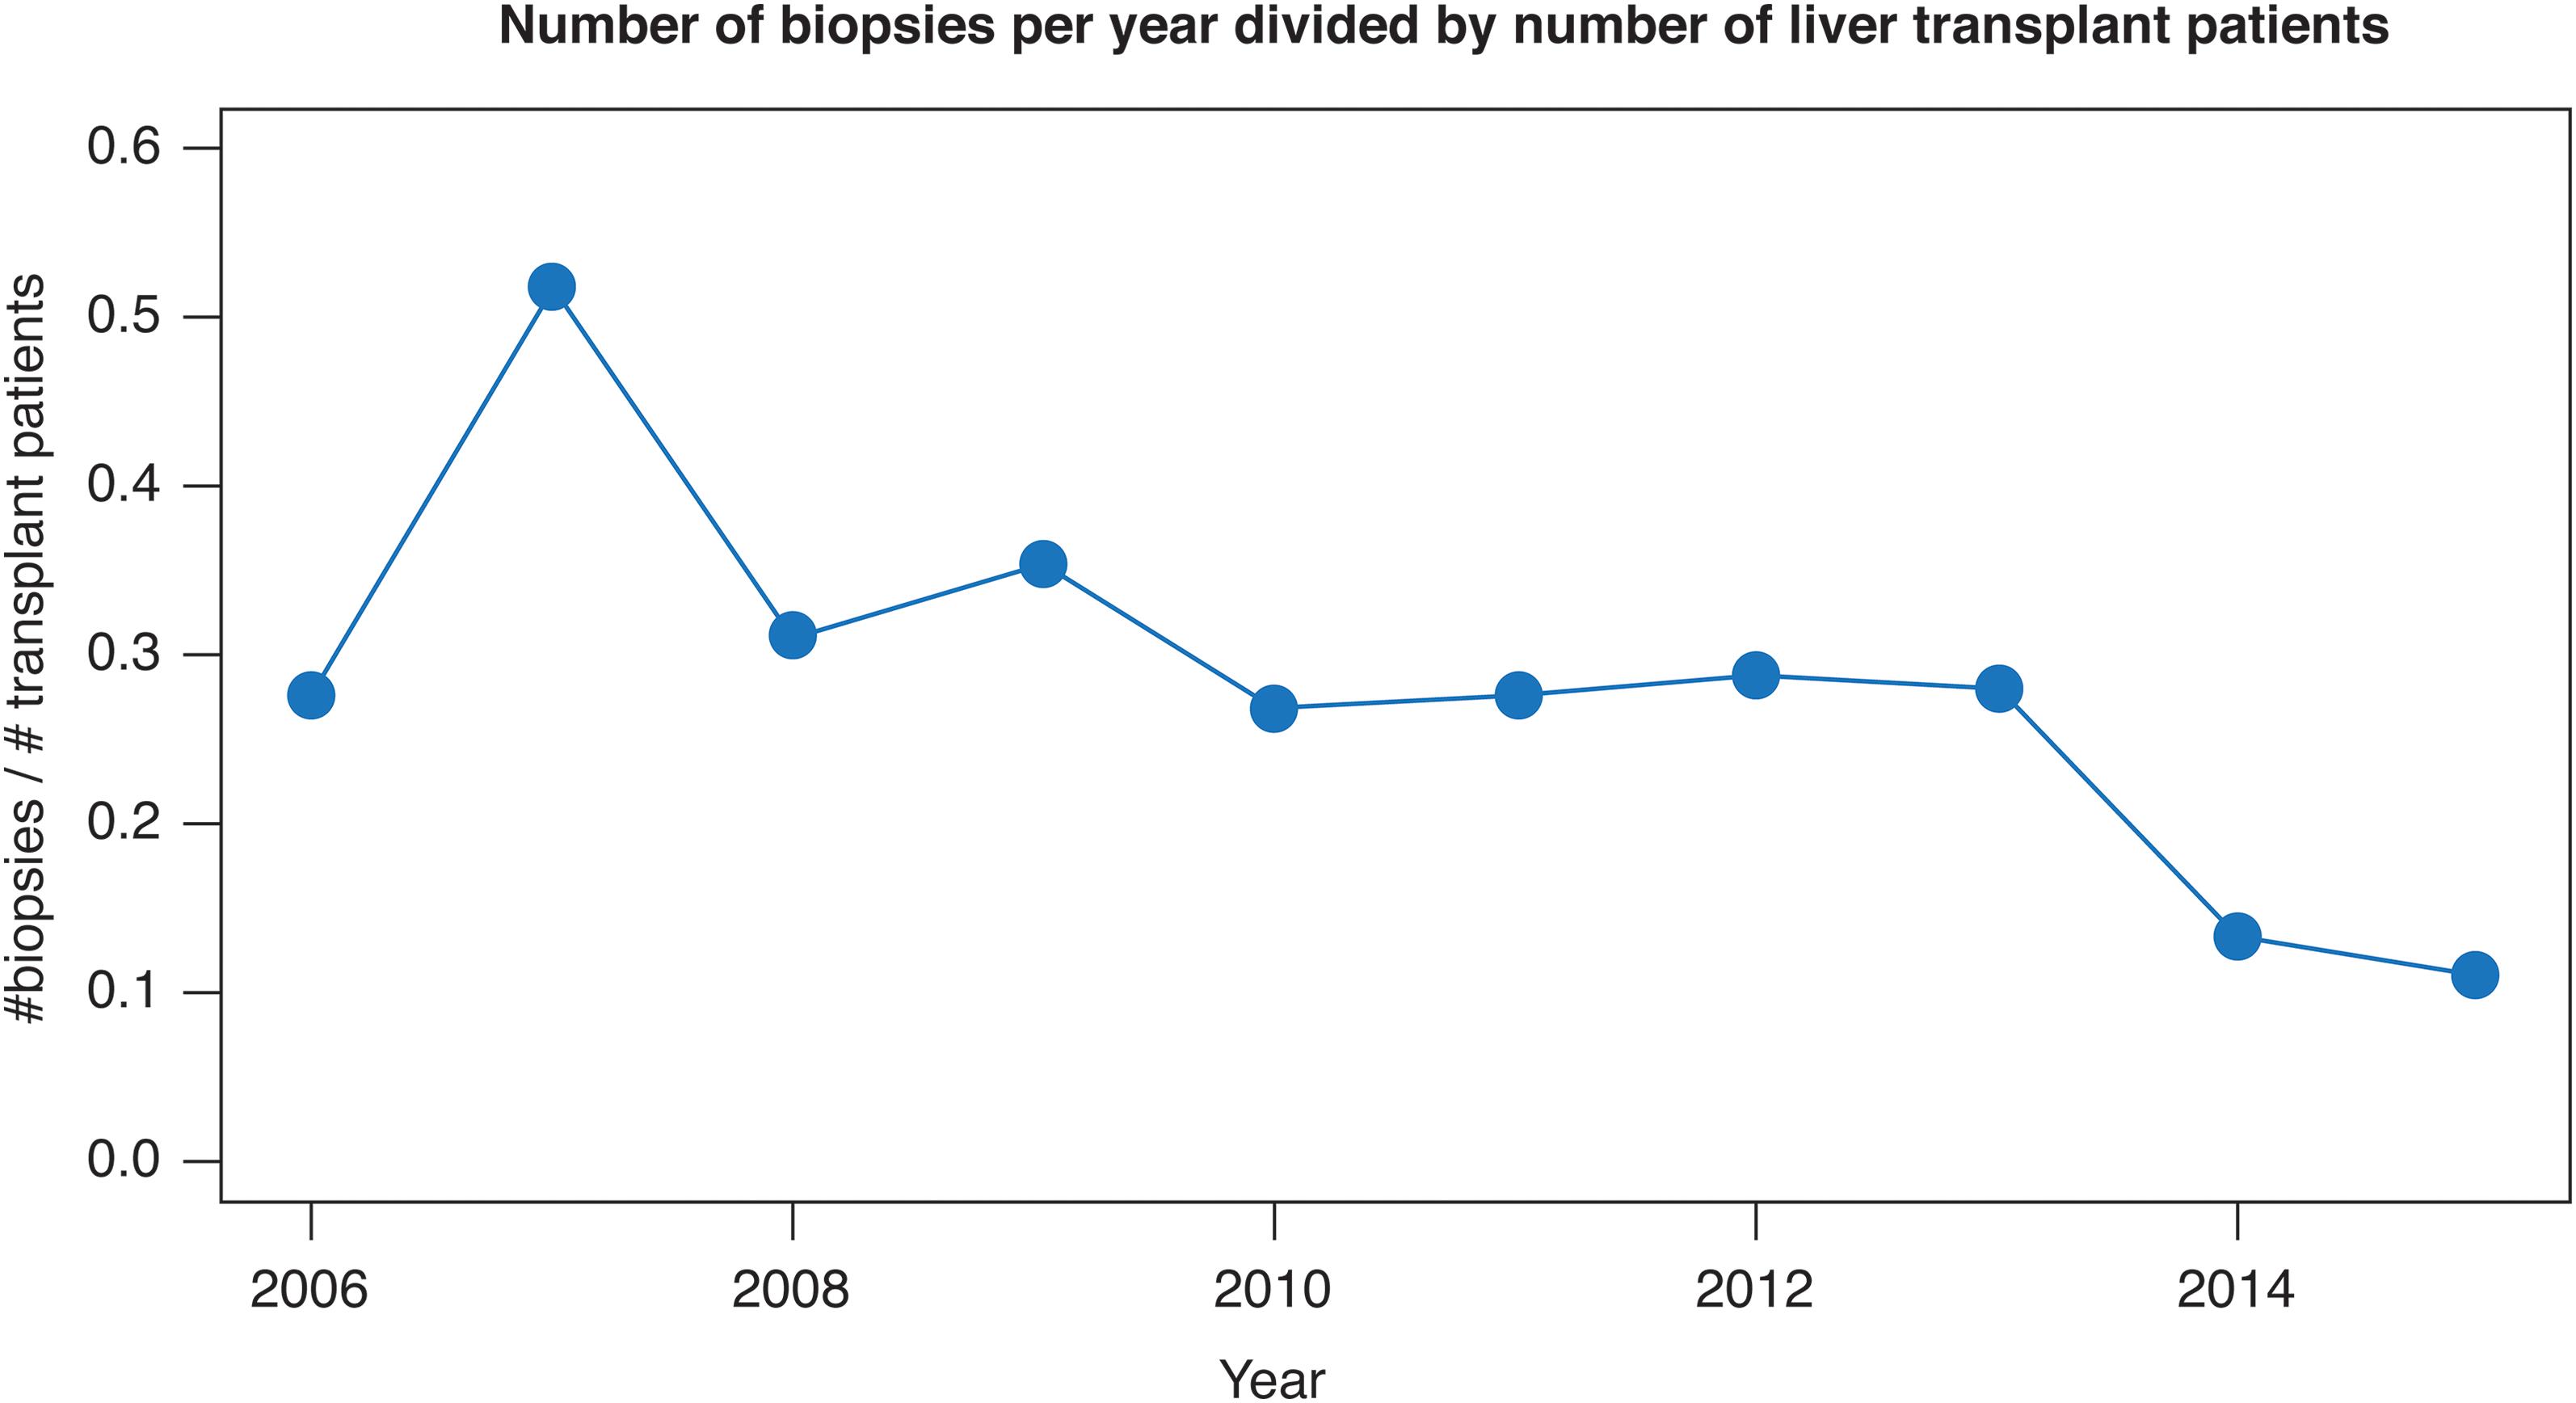 Number of biopsies per year divided by the number of liver transplant patients from January 1, 2006 to October 1, 2015.